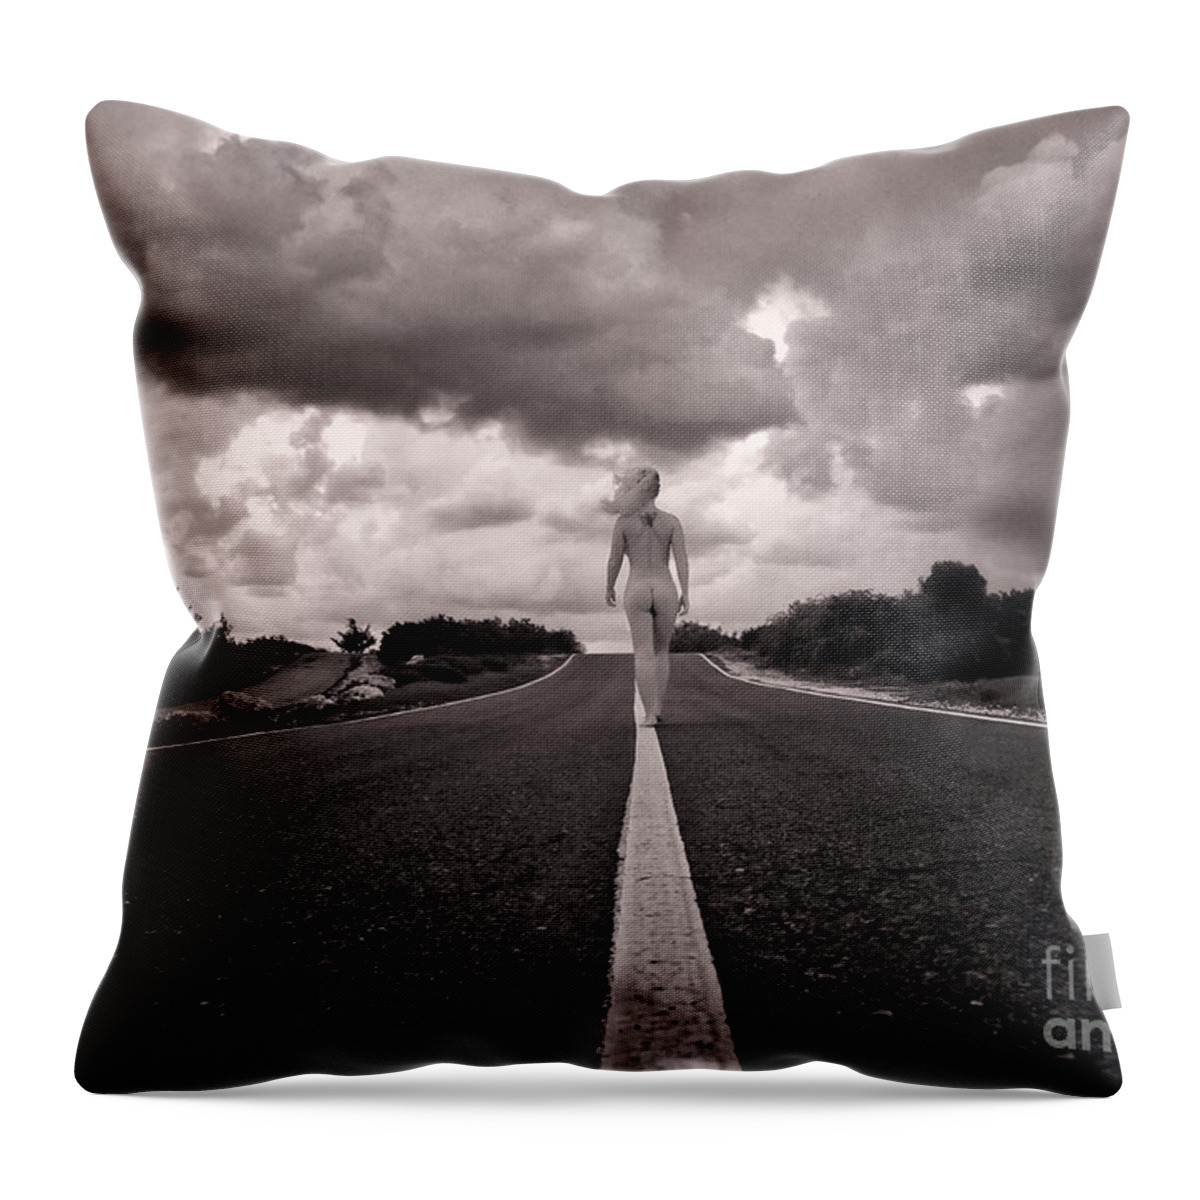 Adult Throw Pillow featuring the photograph My Own Destiny by Stelios Kleanthous